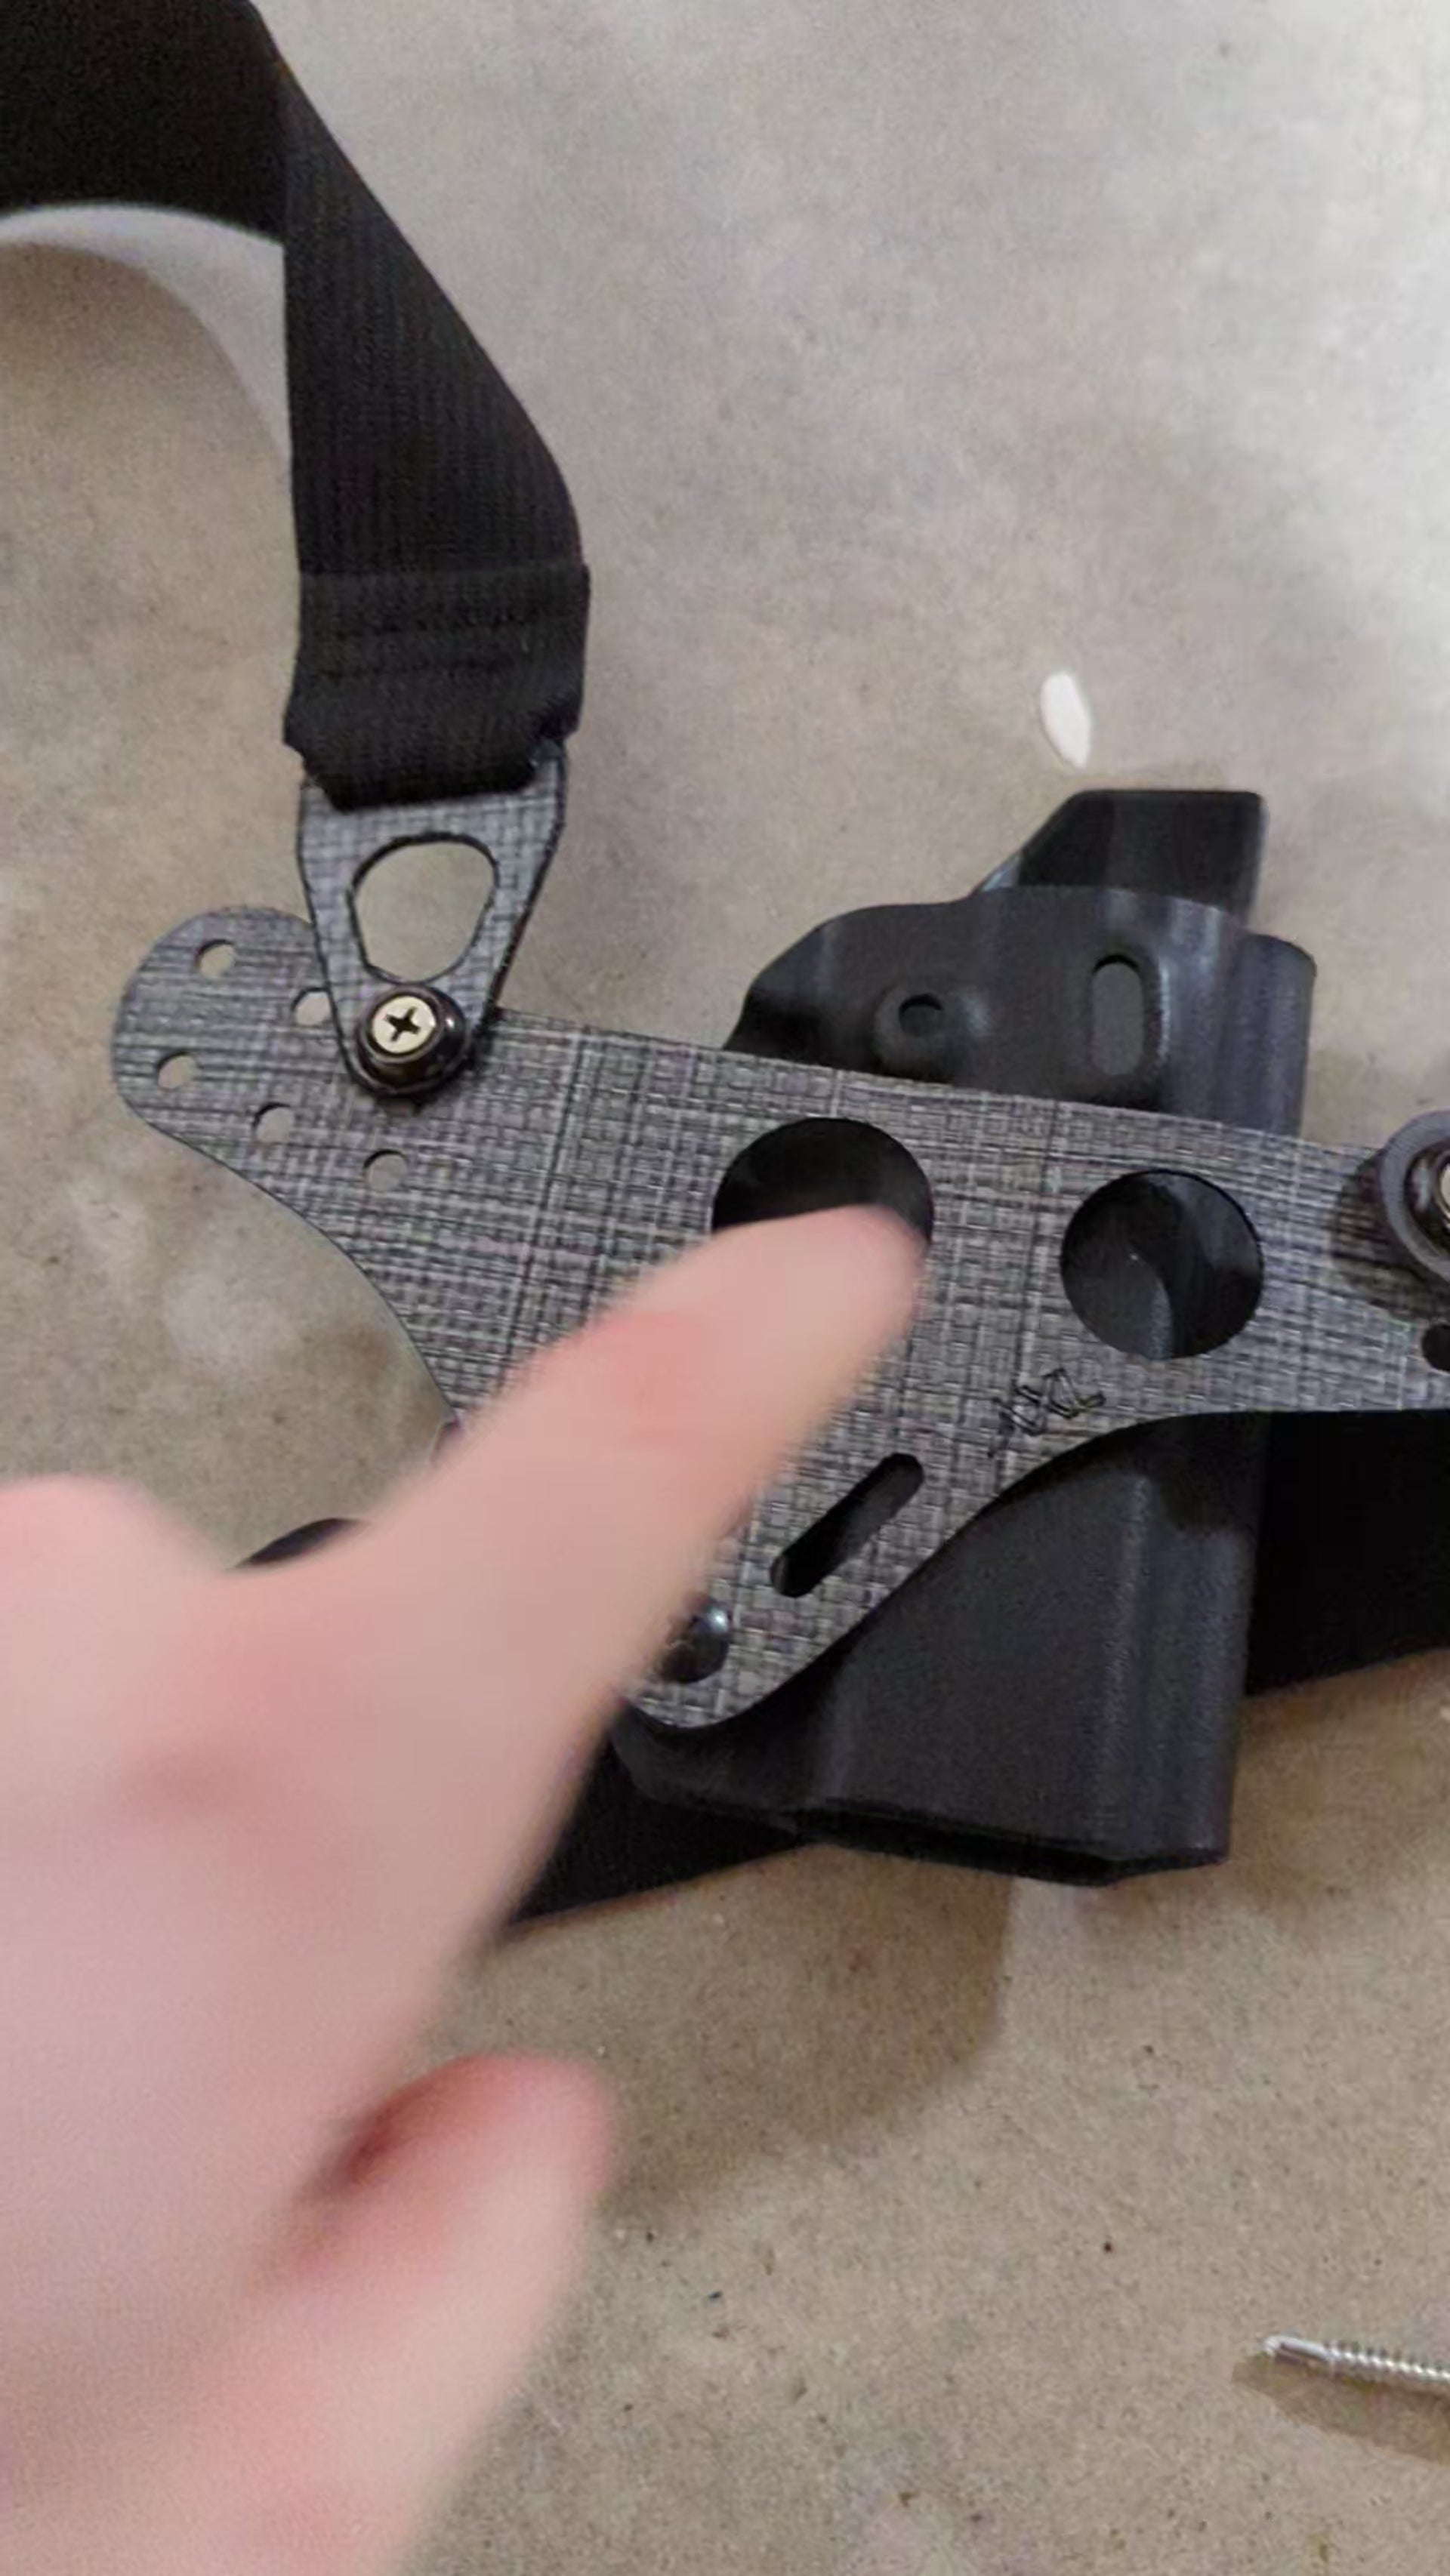 A Closer Look at the Enigma Holster